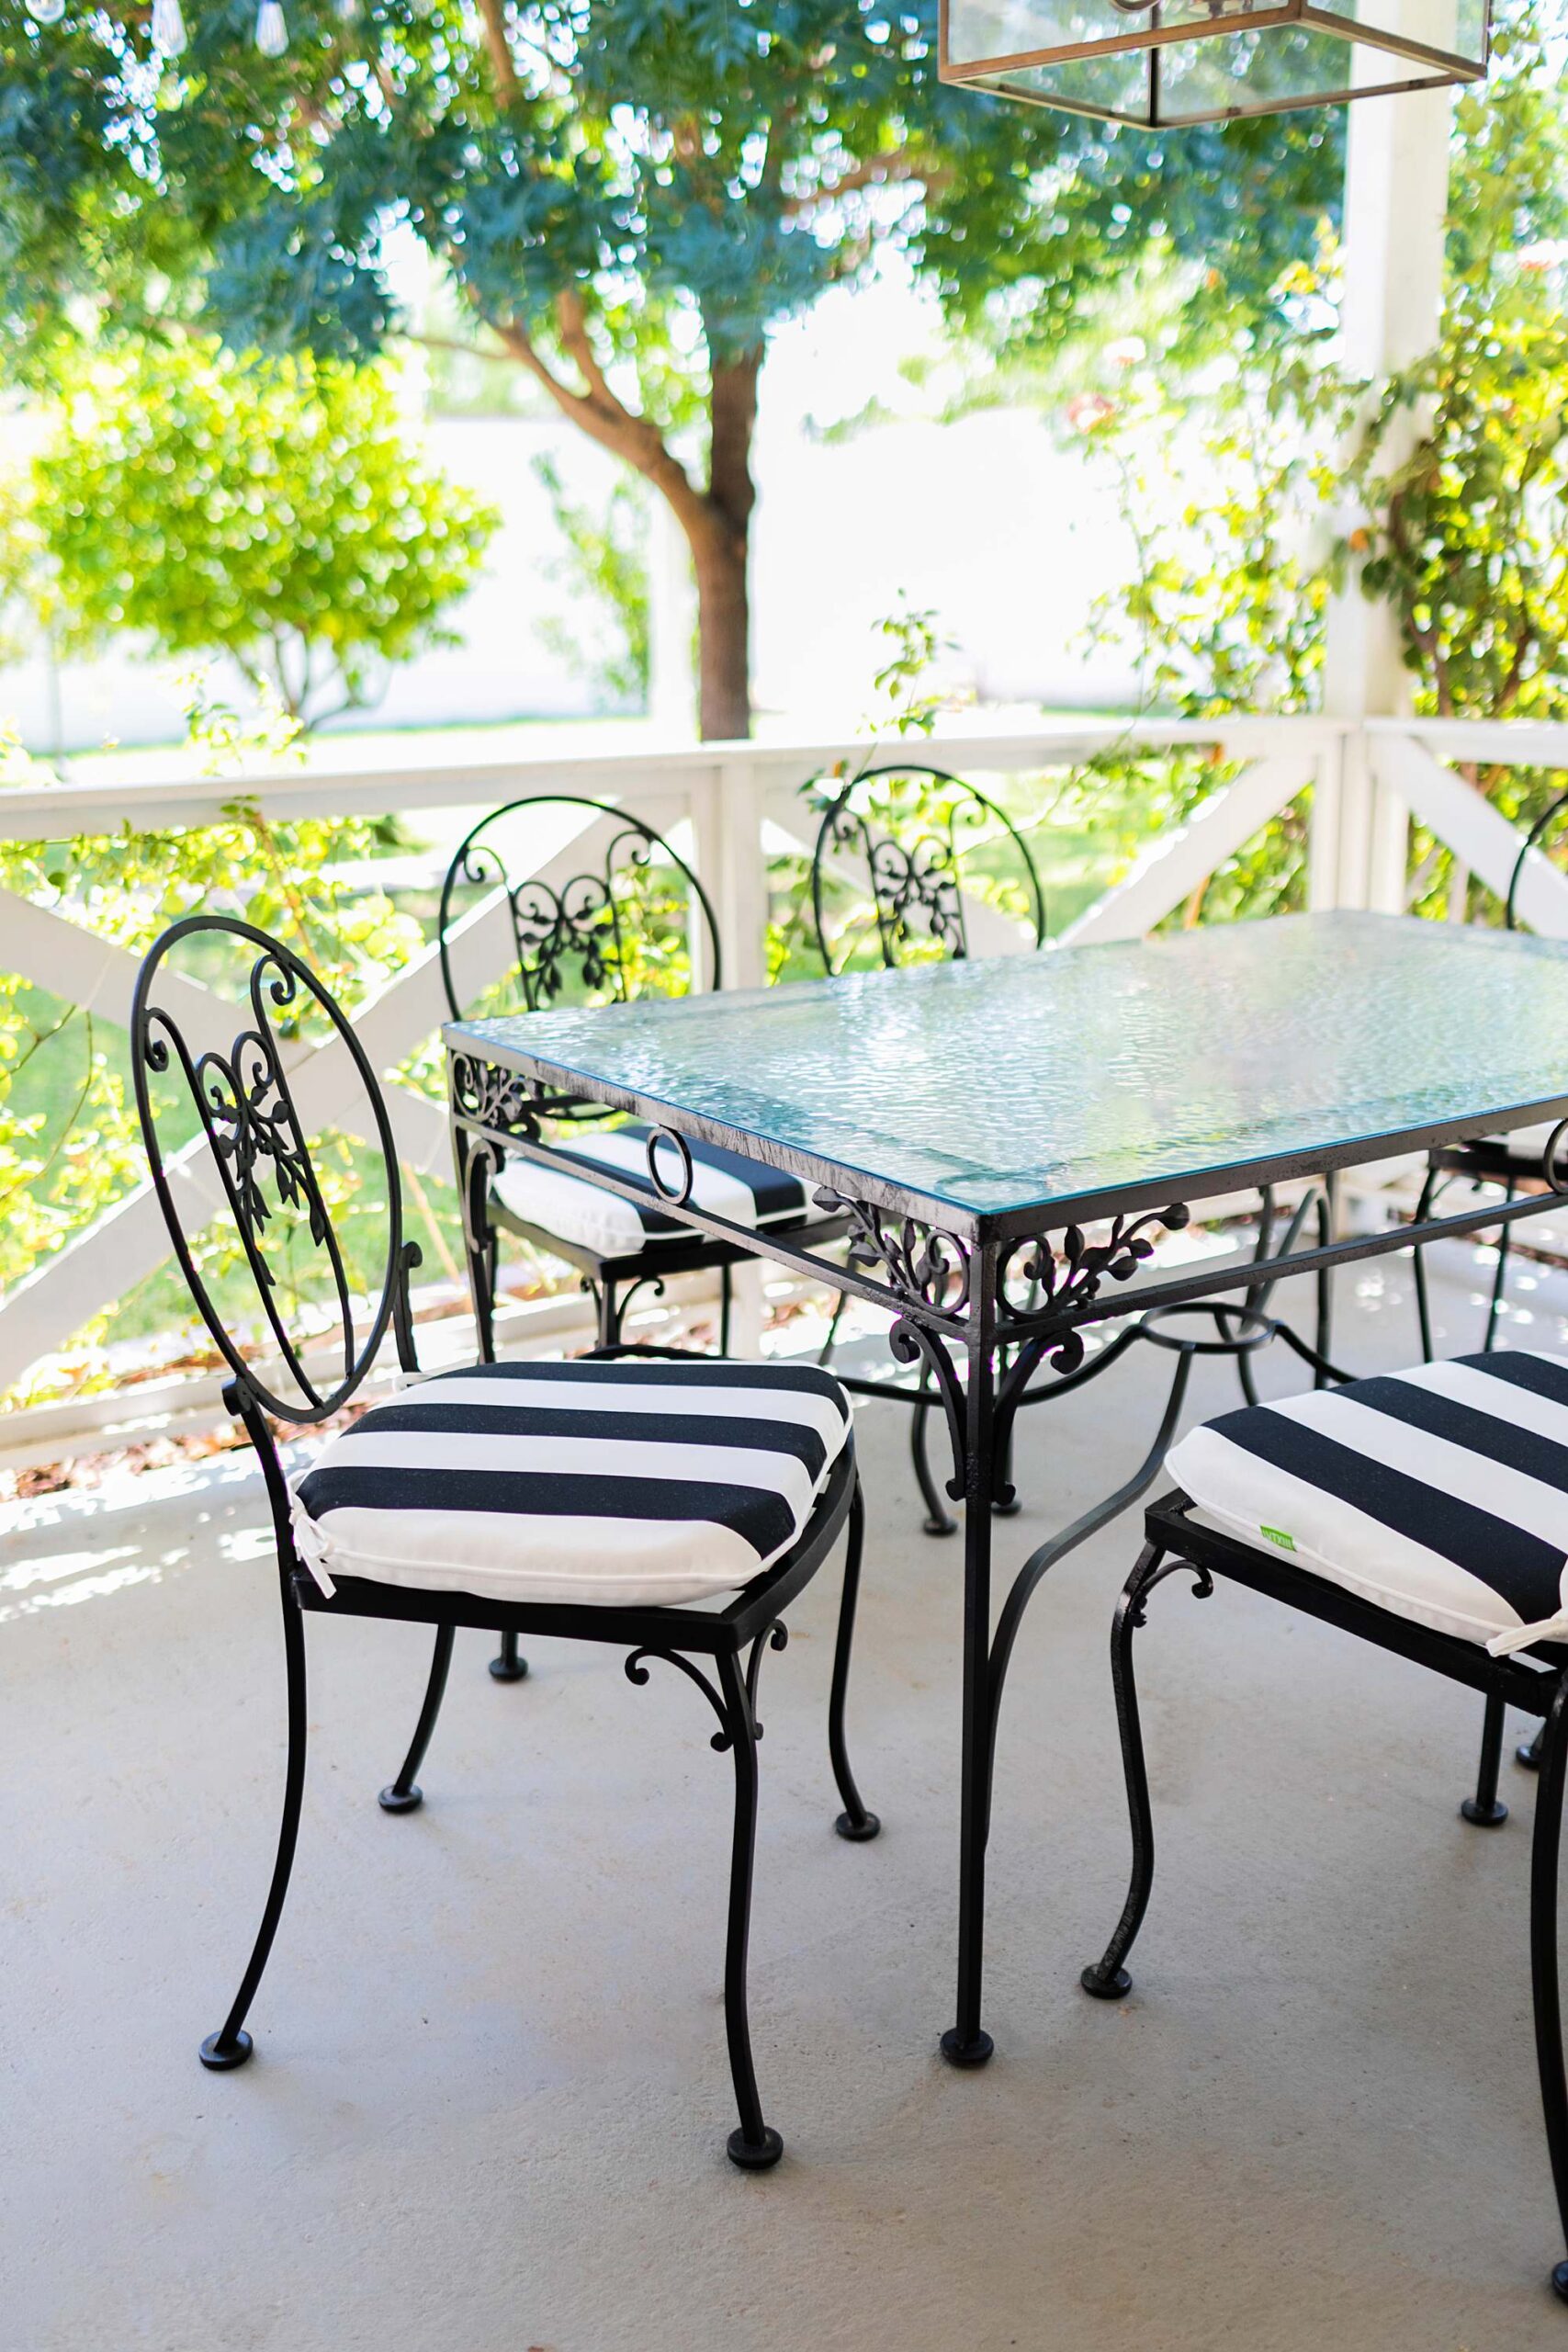 iron mid century modern grand millennial style outdoor table patio set with fresh black and white cushions from amazon - glass top phoenix lifestyle blogger Diana Elizabeth